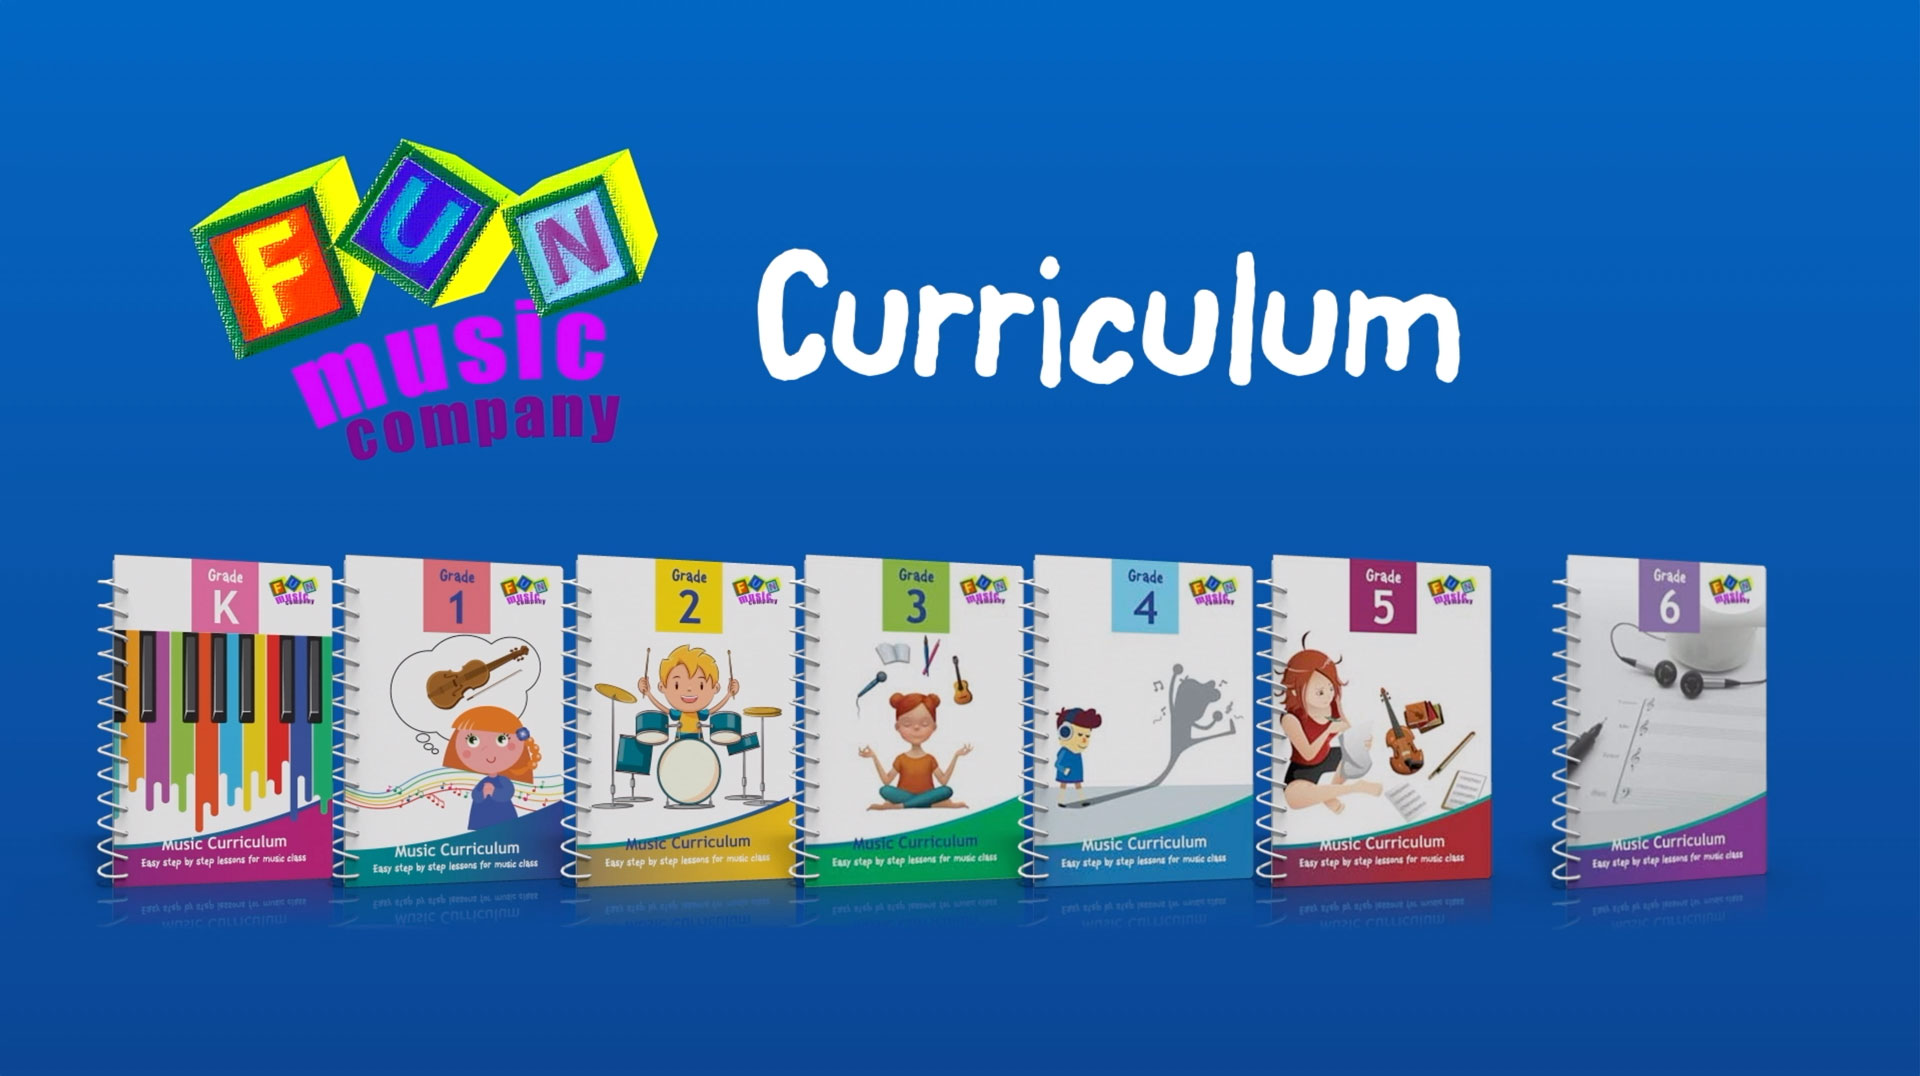 Fun Music Company Curriculum - Full of Music Composition Lesson plans